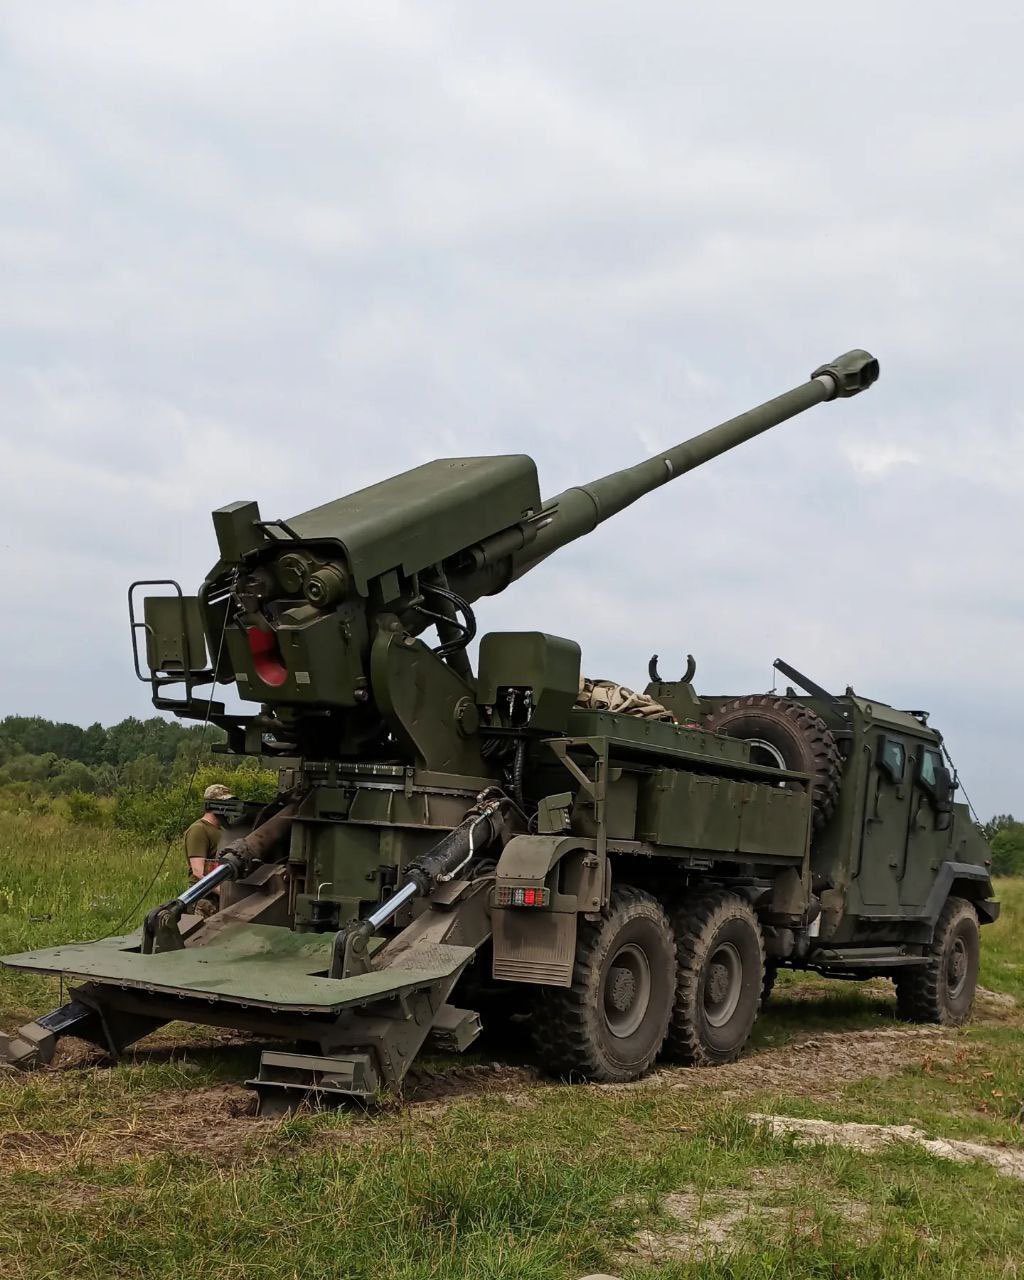 Bohdana howitzer is the only Ukrainian-made 155mm artillery system, it exists only in one prototyope, according to official data, although unofficial open media suggests more are being developed